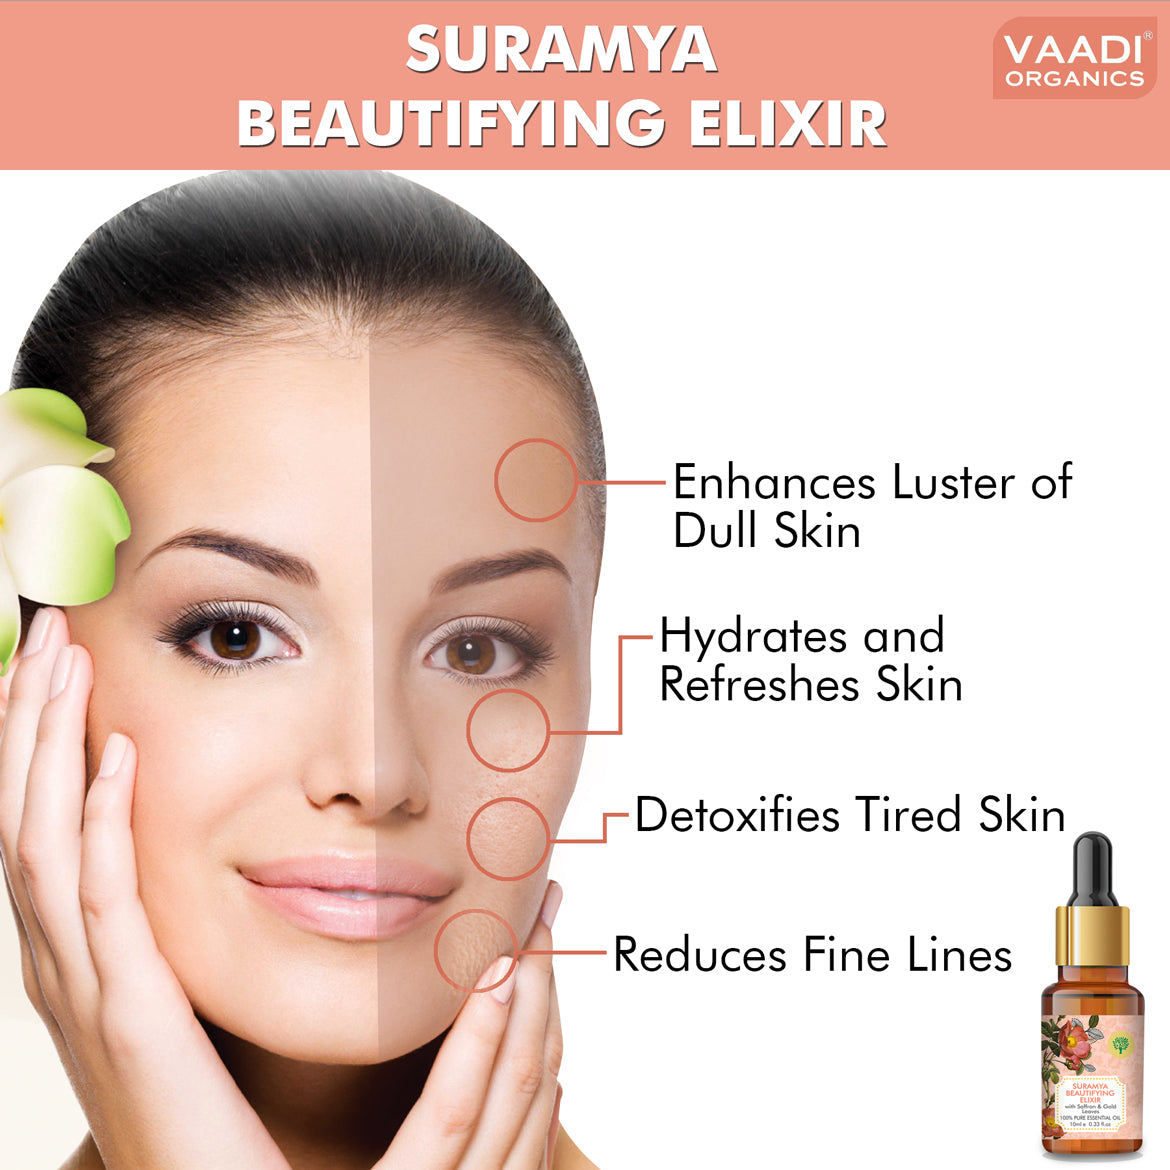 Organic Suramya Beautifying Elixr  - Reduces Fine Lines, Improves Skin Complexion & Gives a Natural Glow